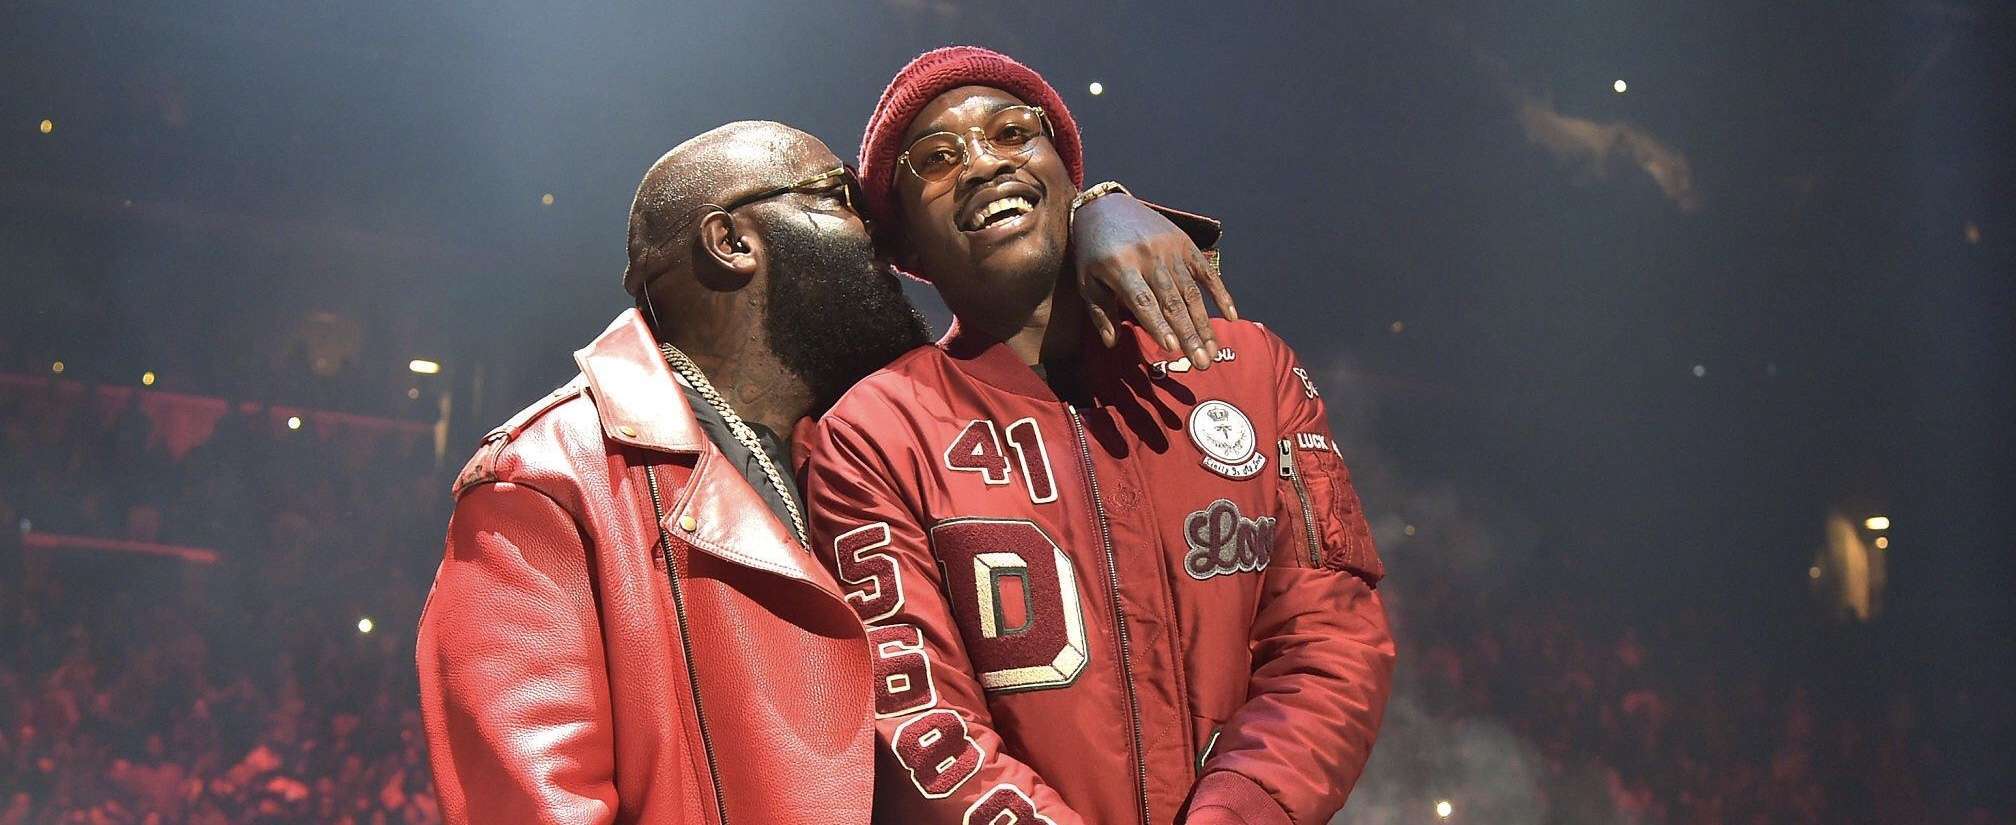 Rick ross and meek mill